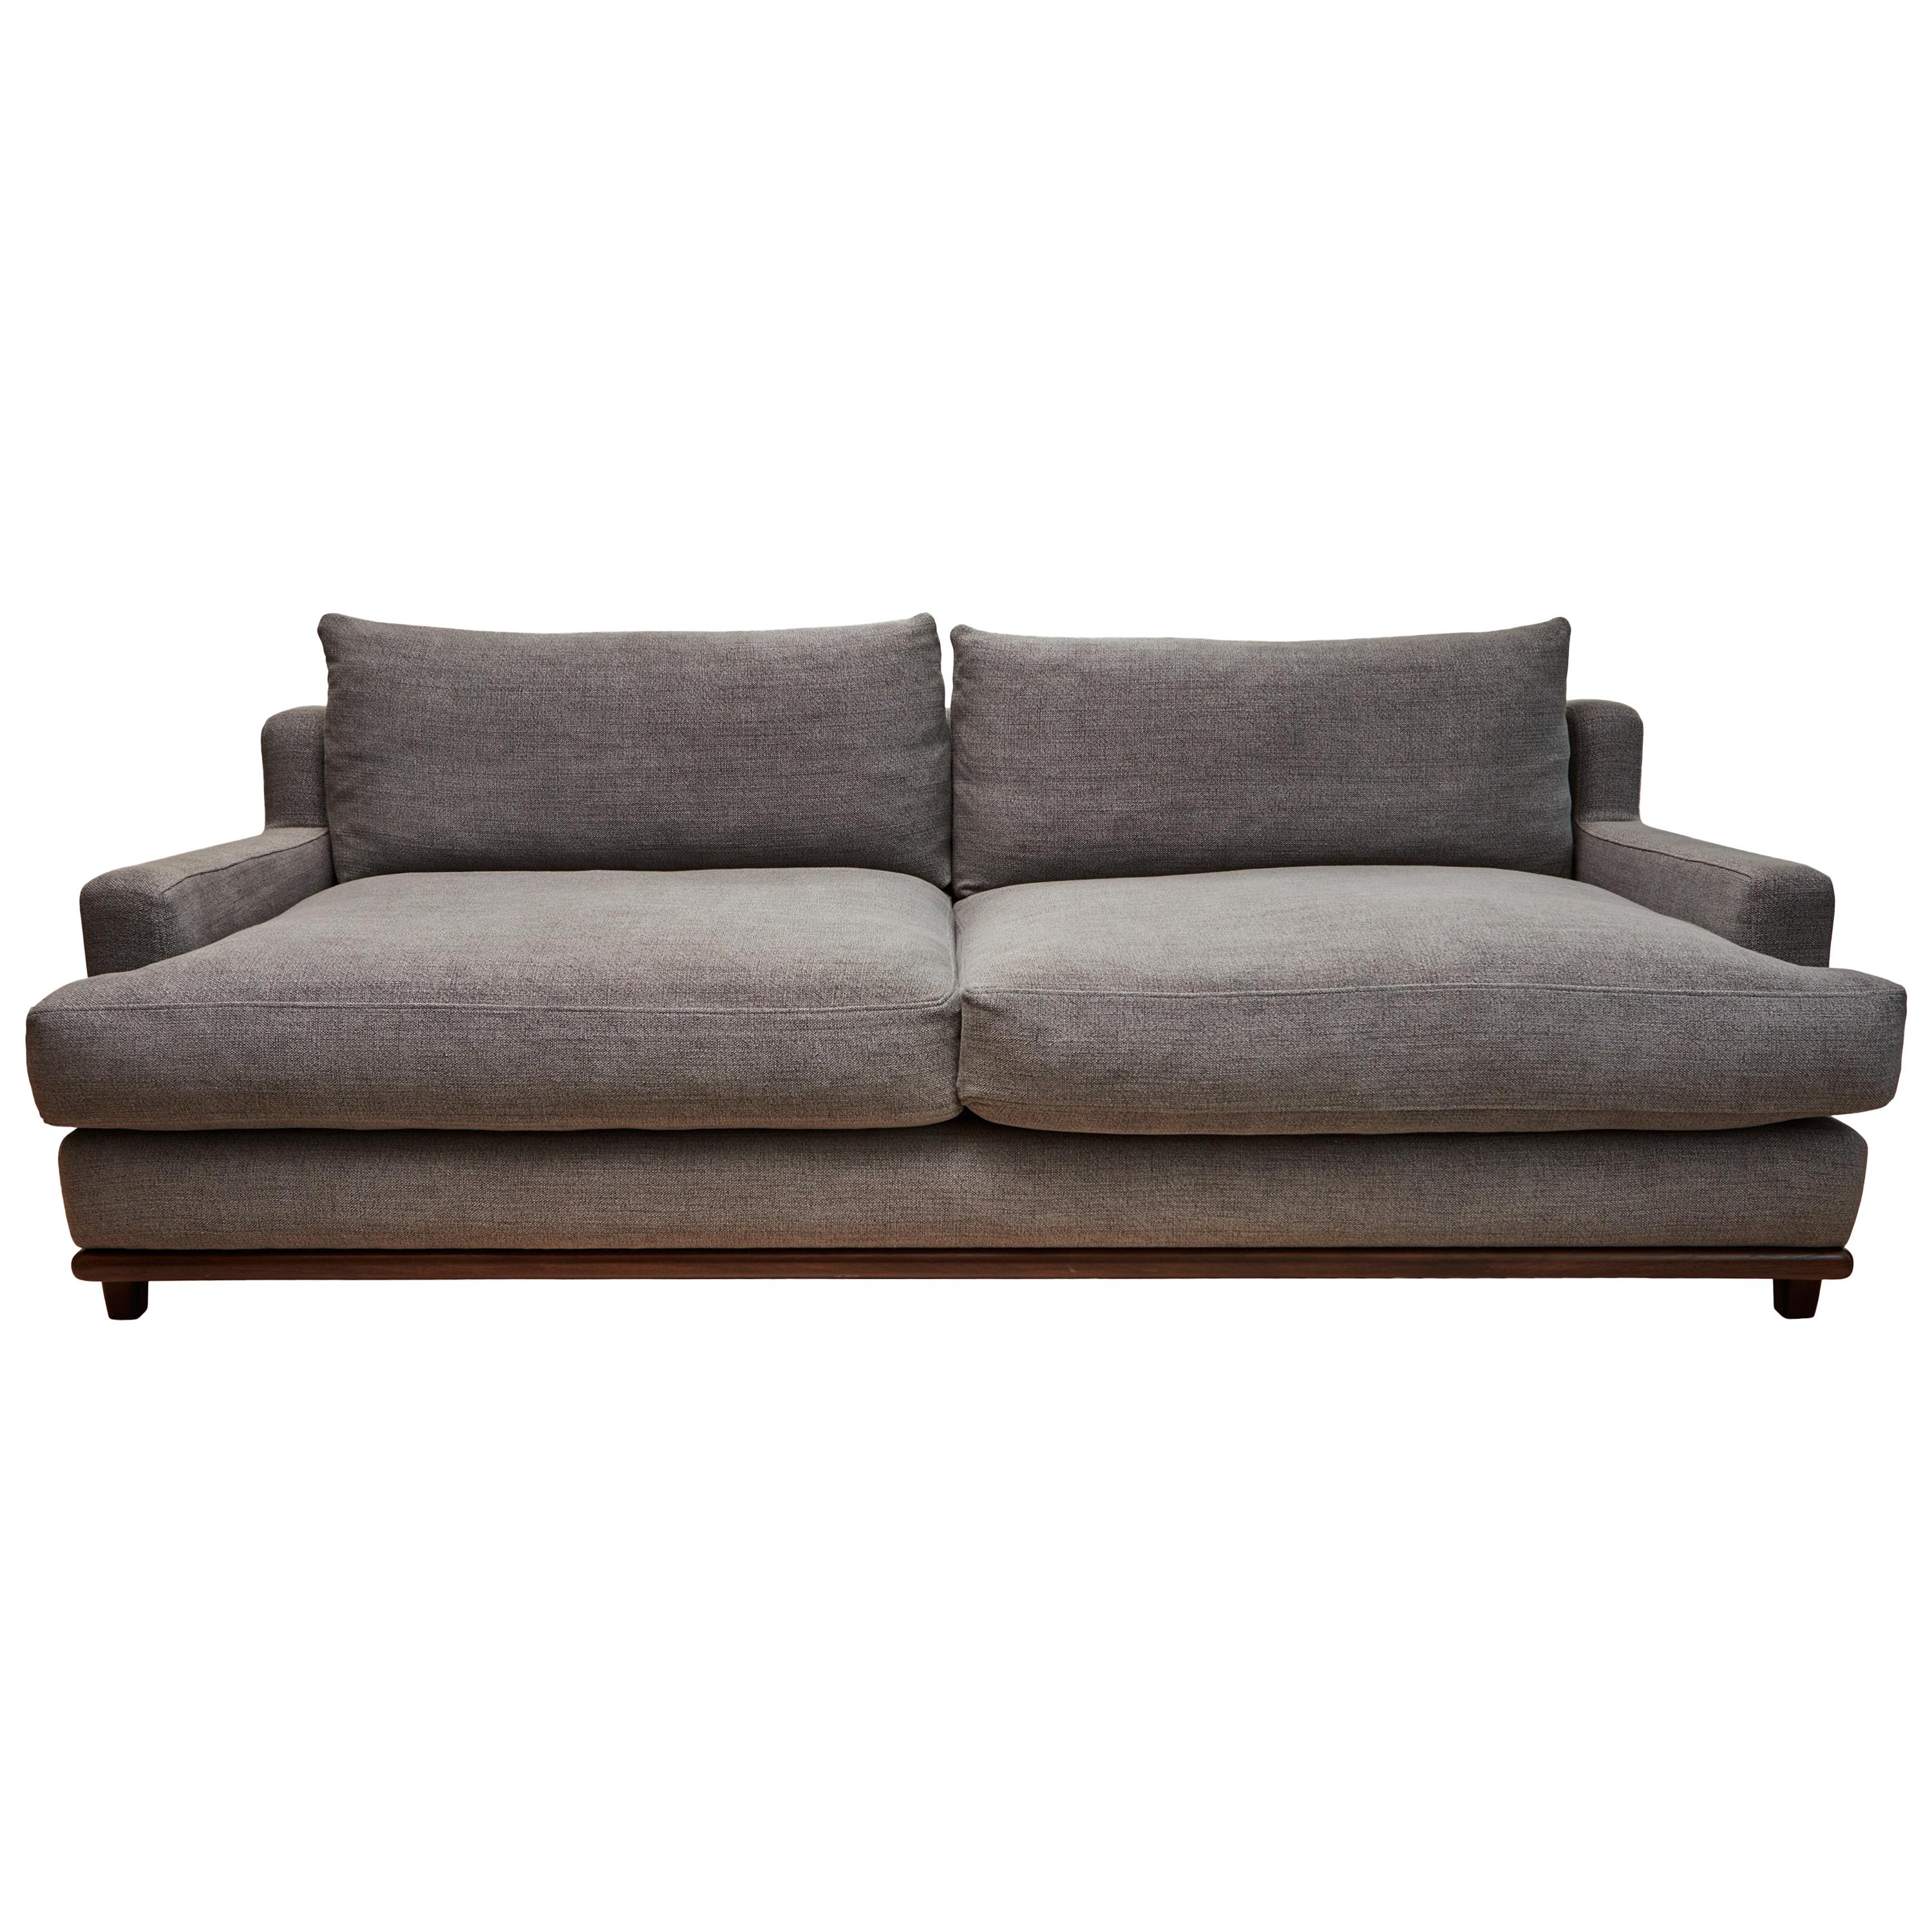 George Sofa by Brian Paquette for Lawson-Fenning